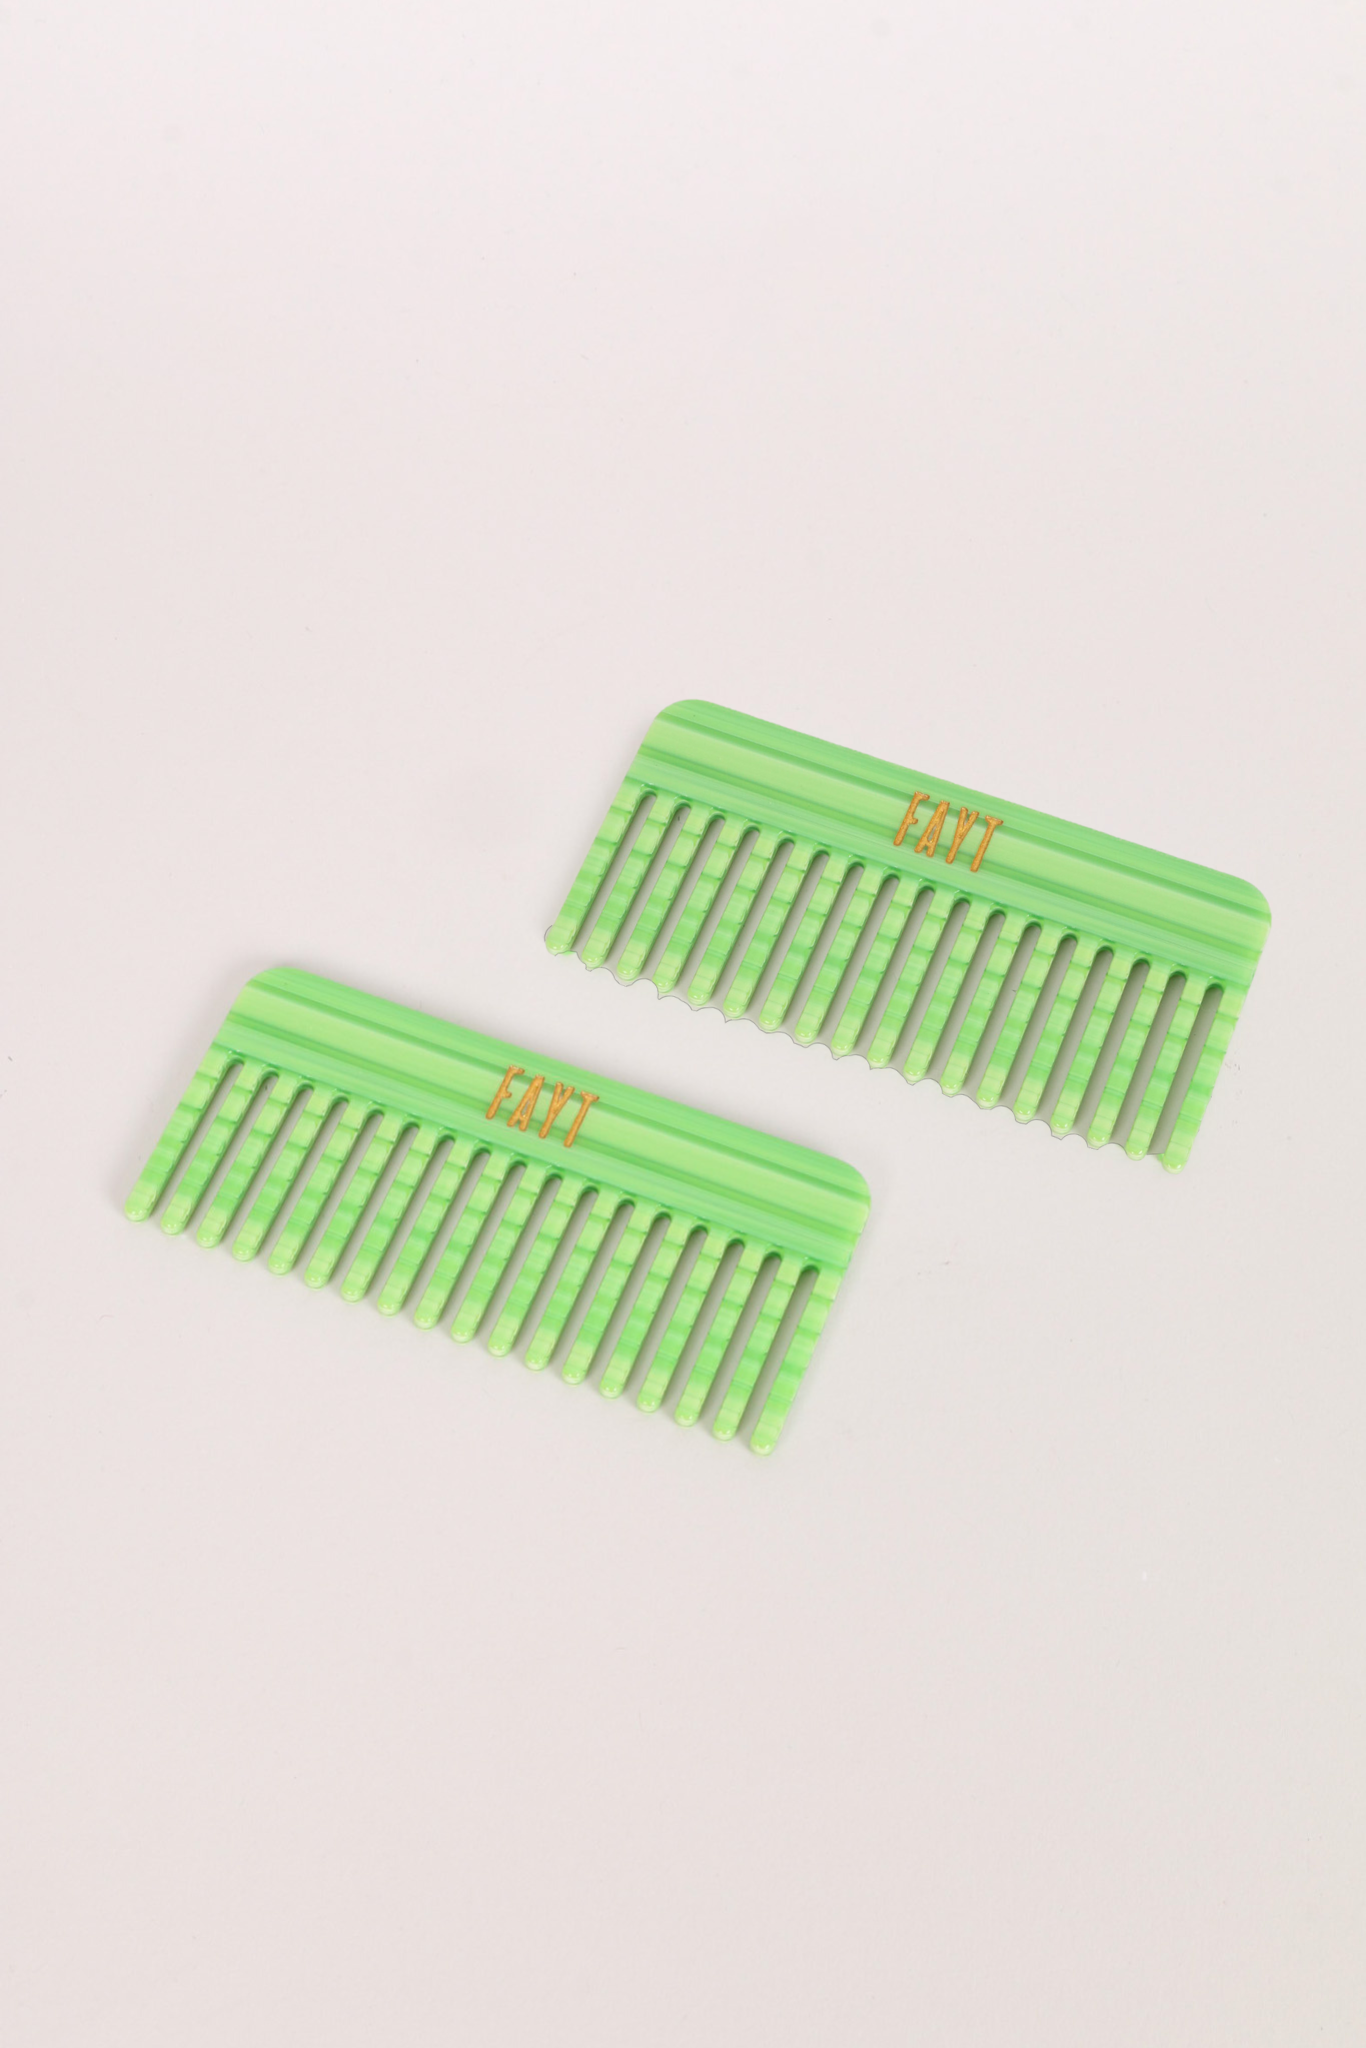 FAYT WIDE TOOTH COMB LIME GREEN